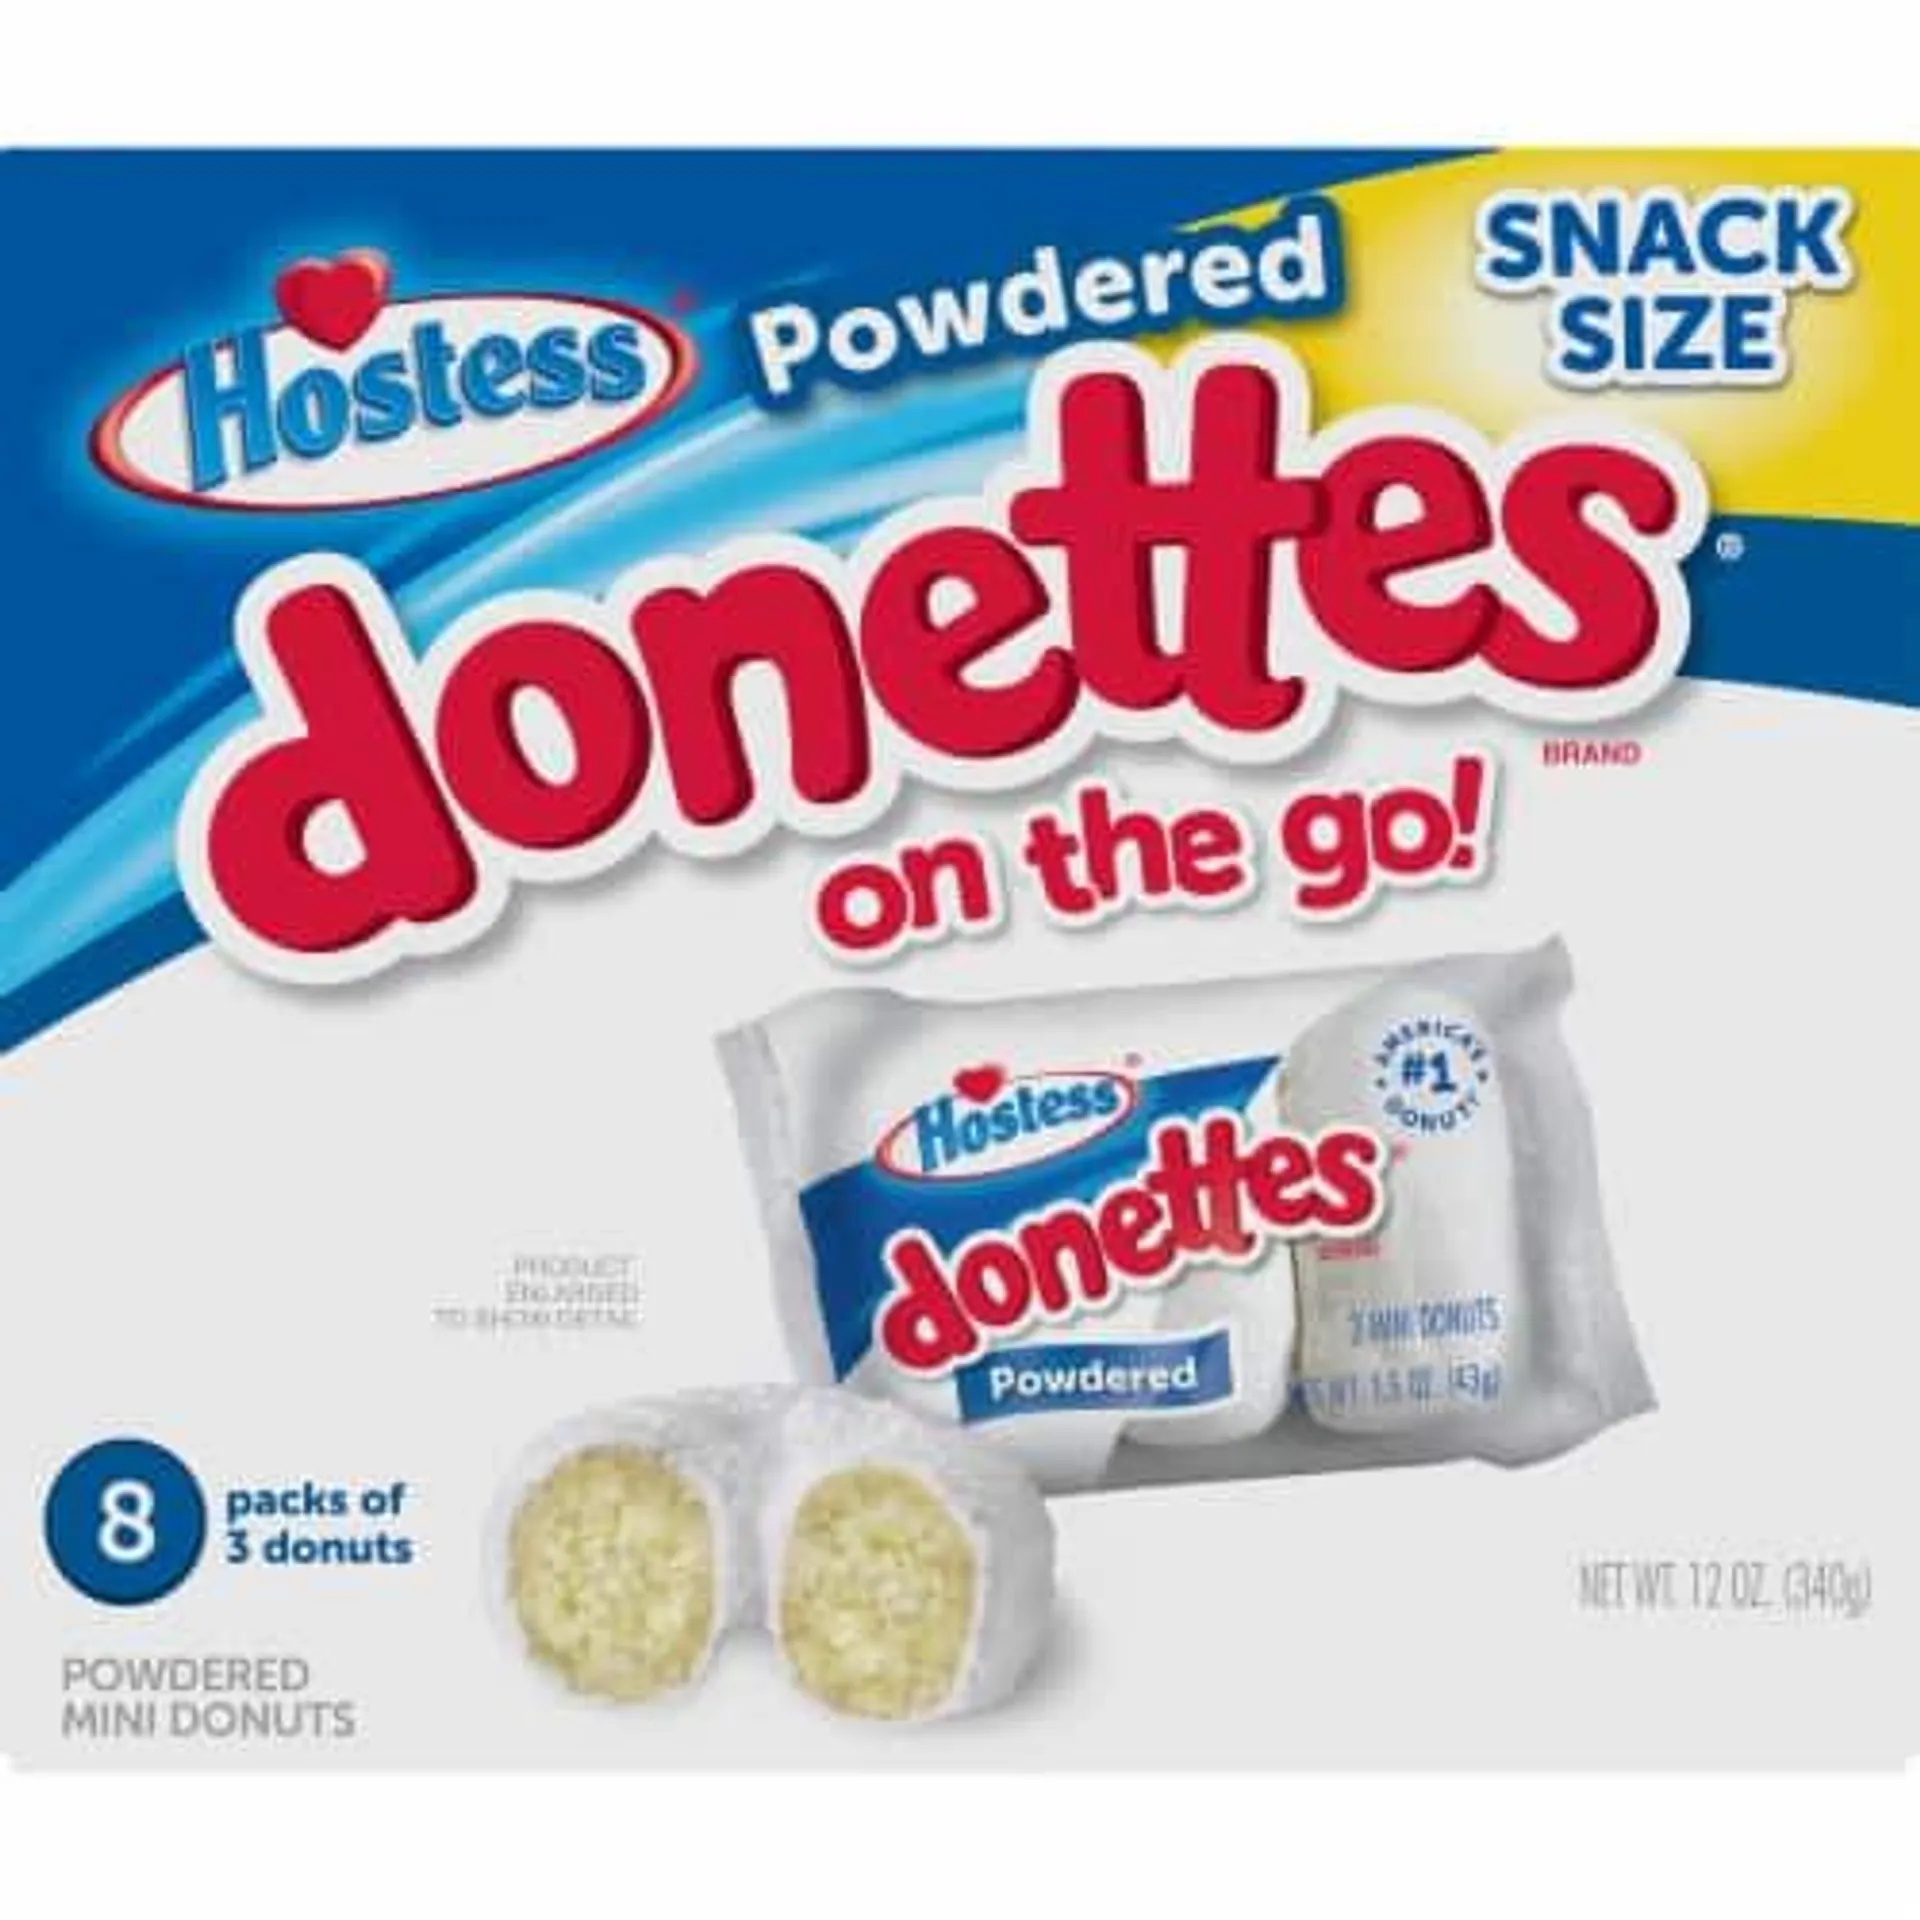 Hostess® Snack Size Powdered Donettes®